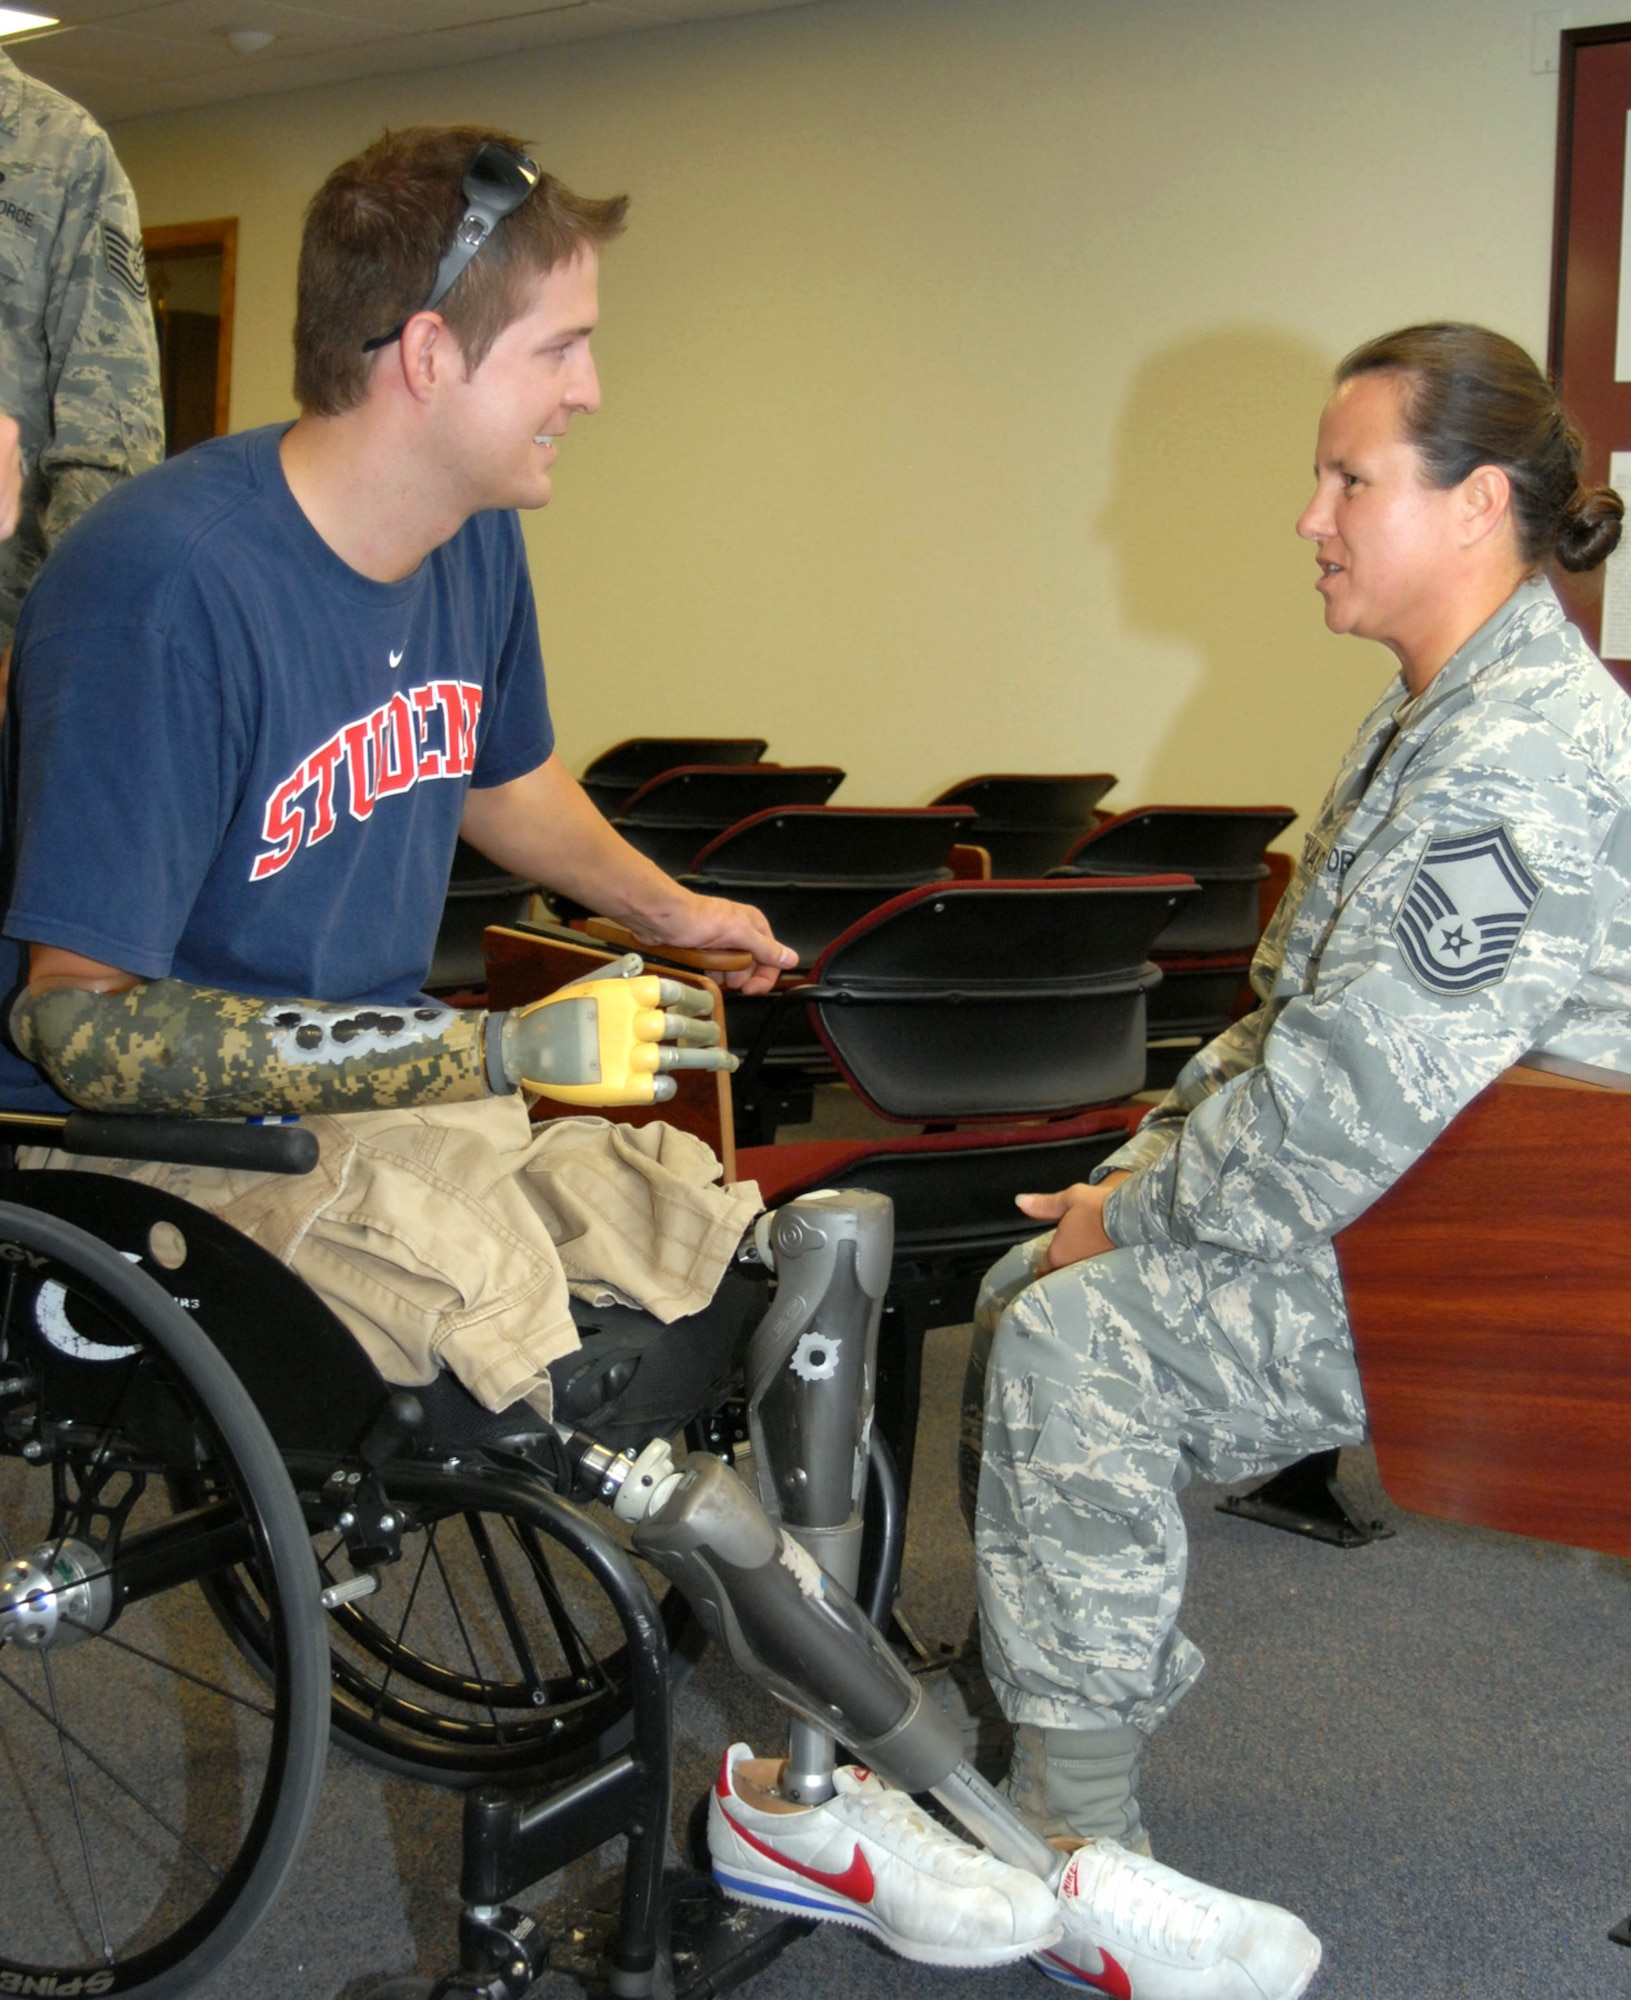 Brian Kolfage, former 17th Security Forces Squadron defender now retired Senior Airman, speaks to Senior Master Sgt. Annette Whitenack at Goodfellow AFB, Texas, on July 2. Brian spoke about his experience on Sept. 11, 2004, a rocket attack left him without legs and a right arm. Senior Master Sgt Whitenack was one of the first medical responders on scene after Brian was injured. (U.S. Air Force photo by Robert Martinez)